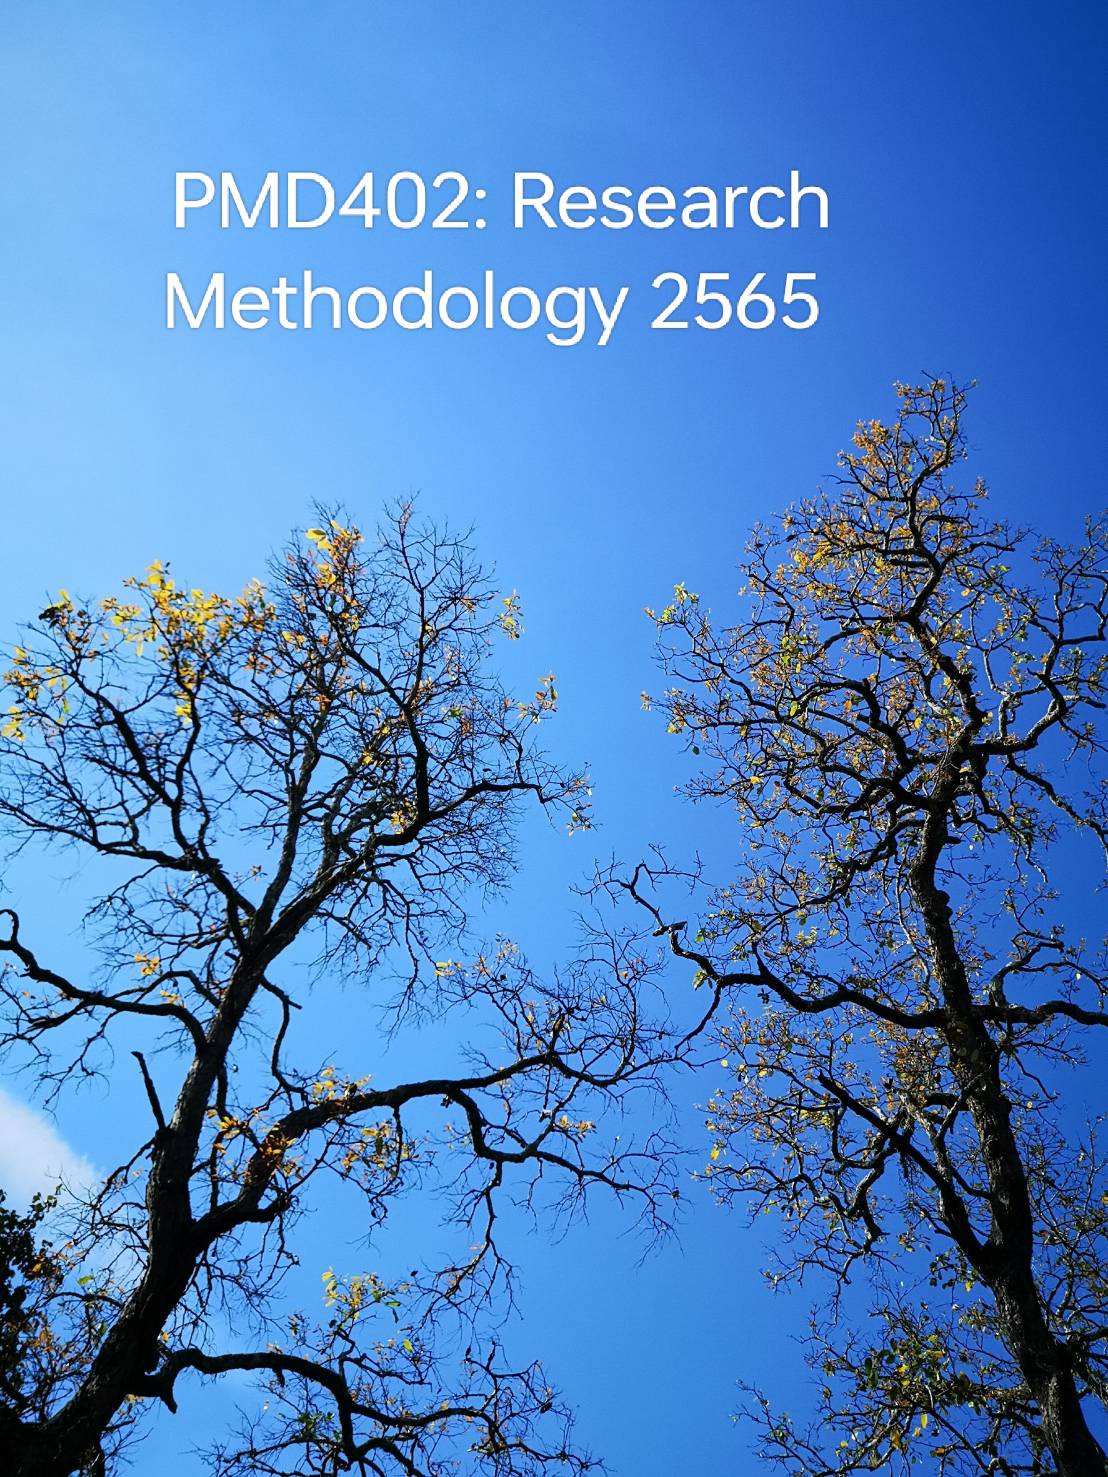 PMD402: Research Methodology in Pharmaceutical Sciences_2565